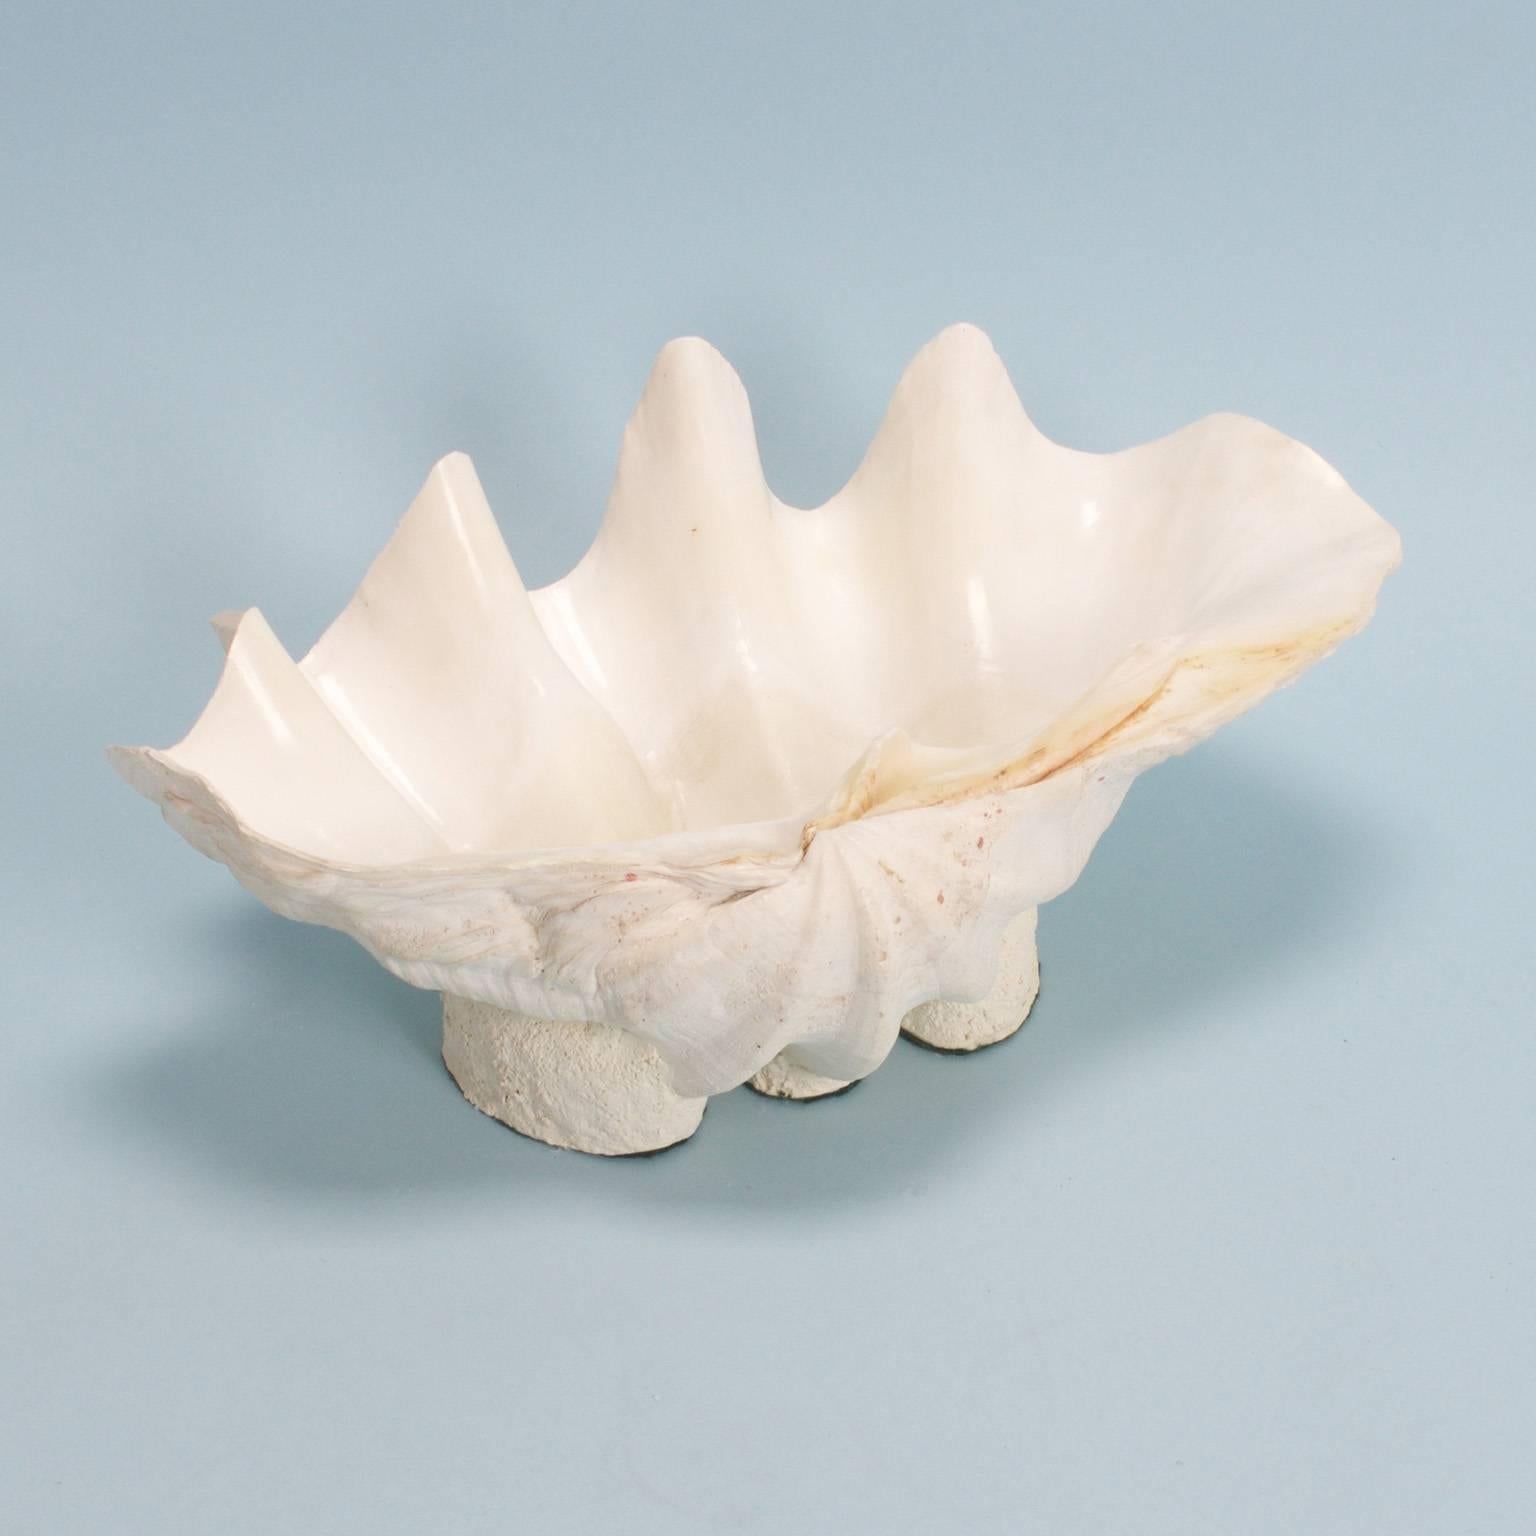 Authentic large clam shell with graceful flowing lines and variegated organic colors. Presented on a custom stand to enhance the sculptural elements. Perfectly cleaned.


